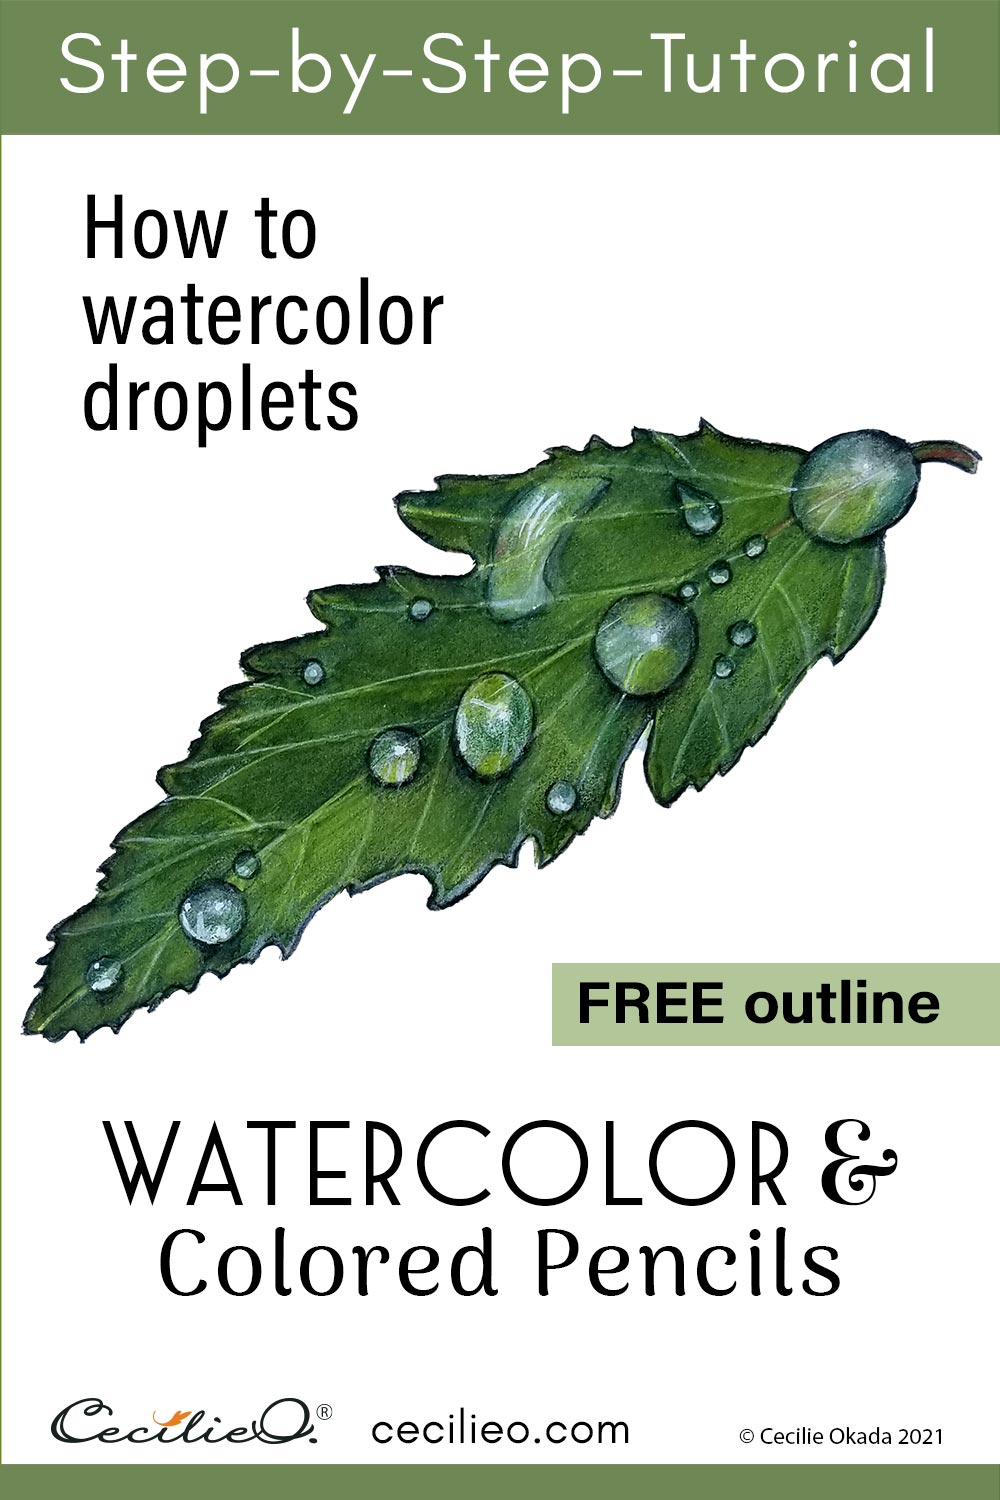 Water drops that appear on leaves are the result of a natural process